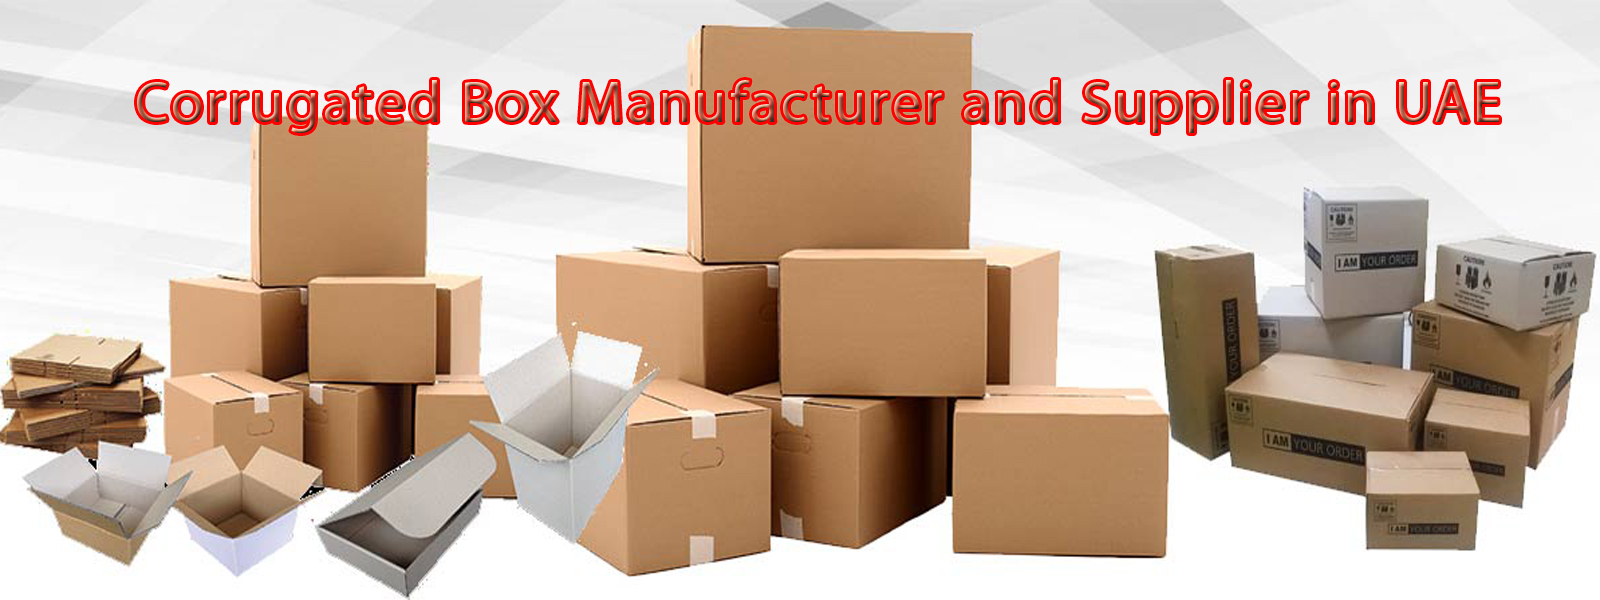 Corrugated box manufacturer and supplier in UAE